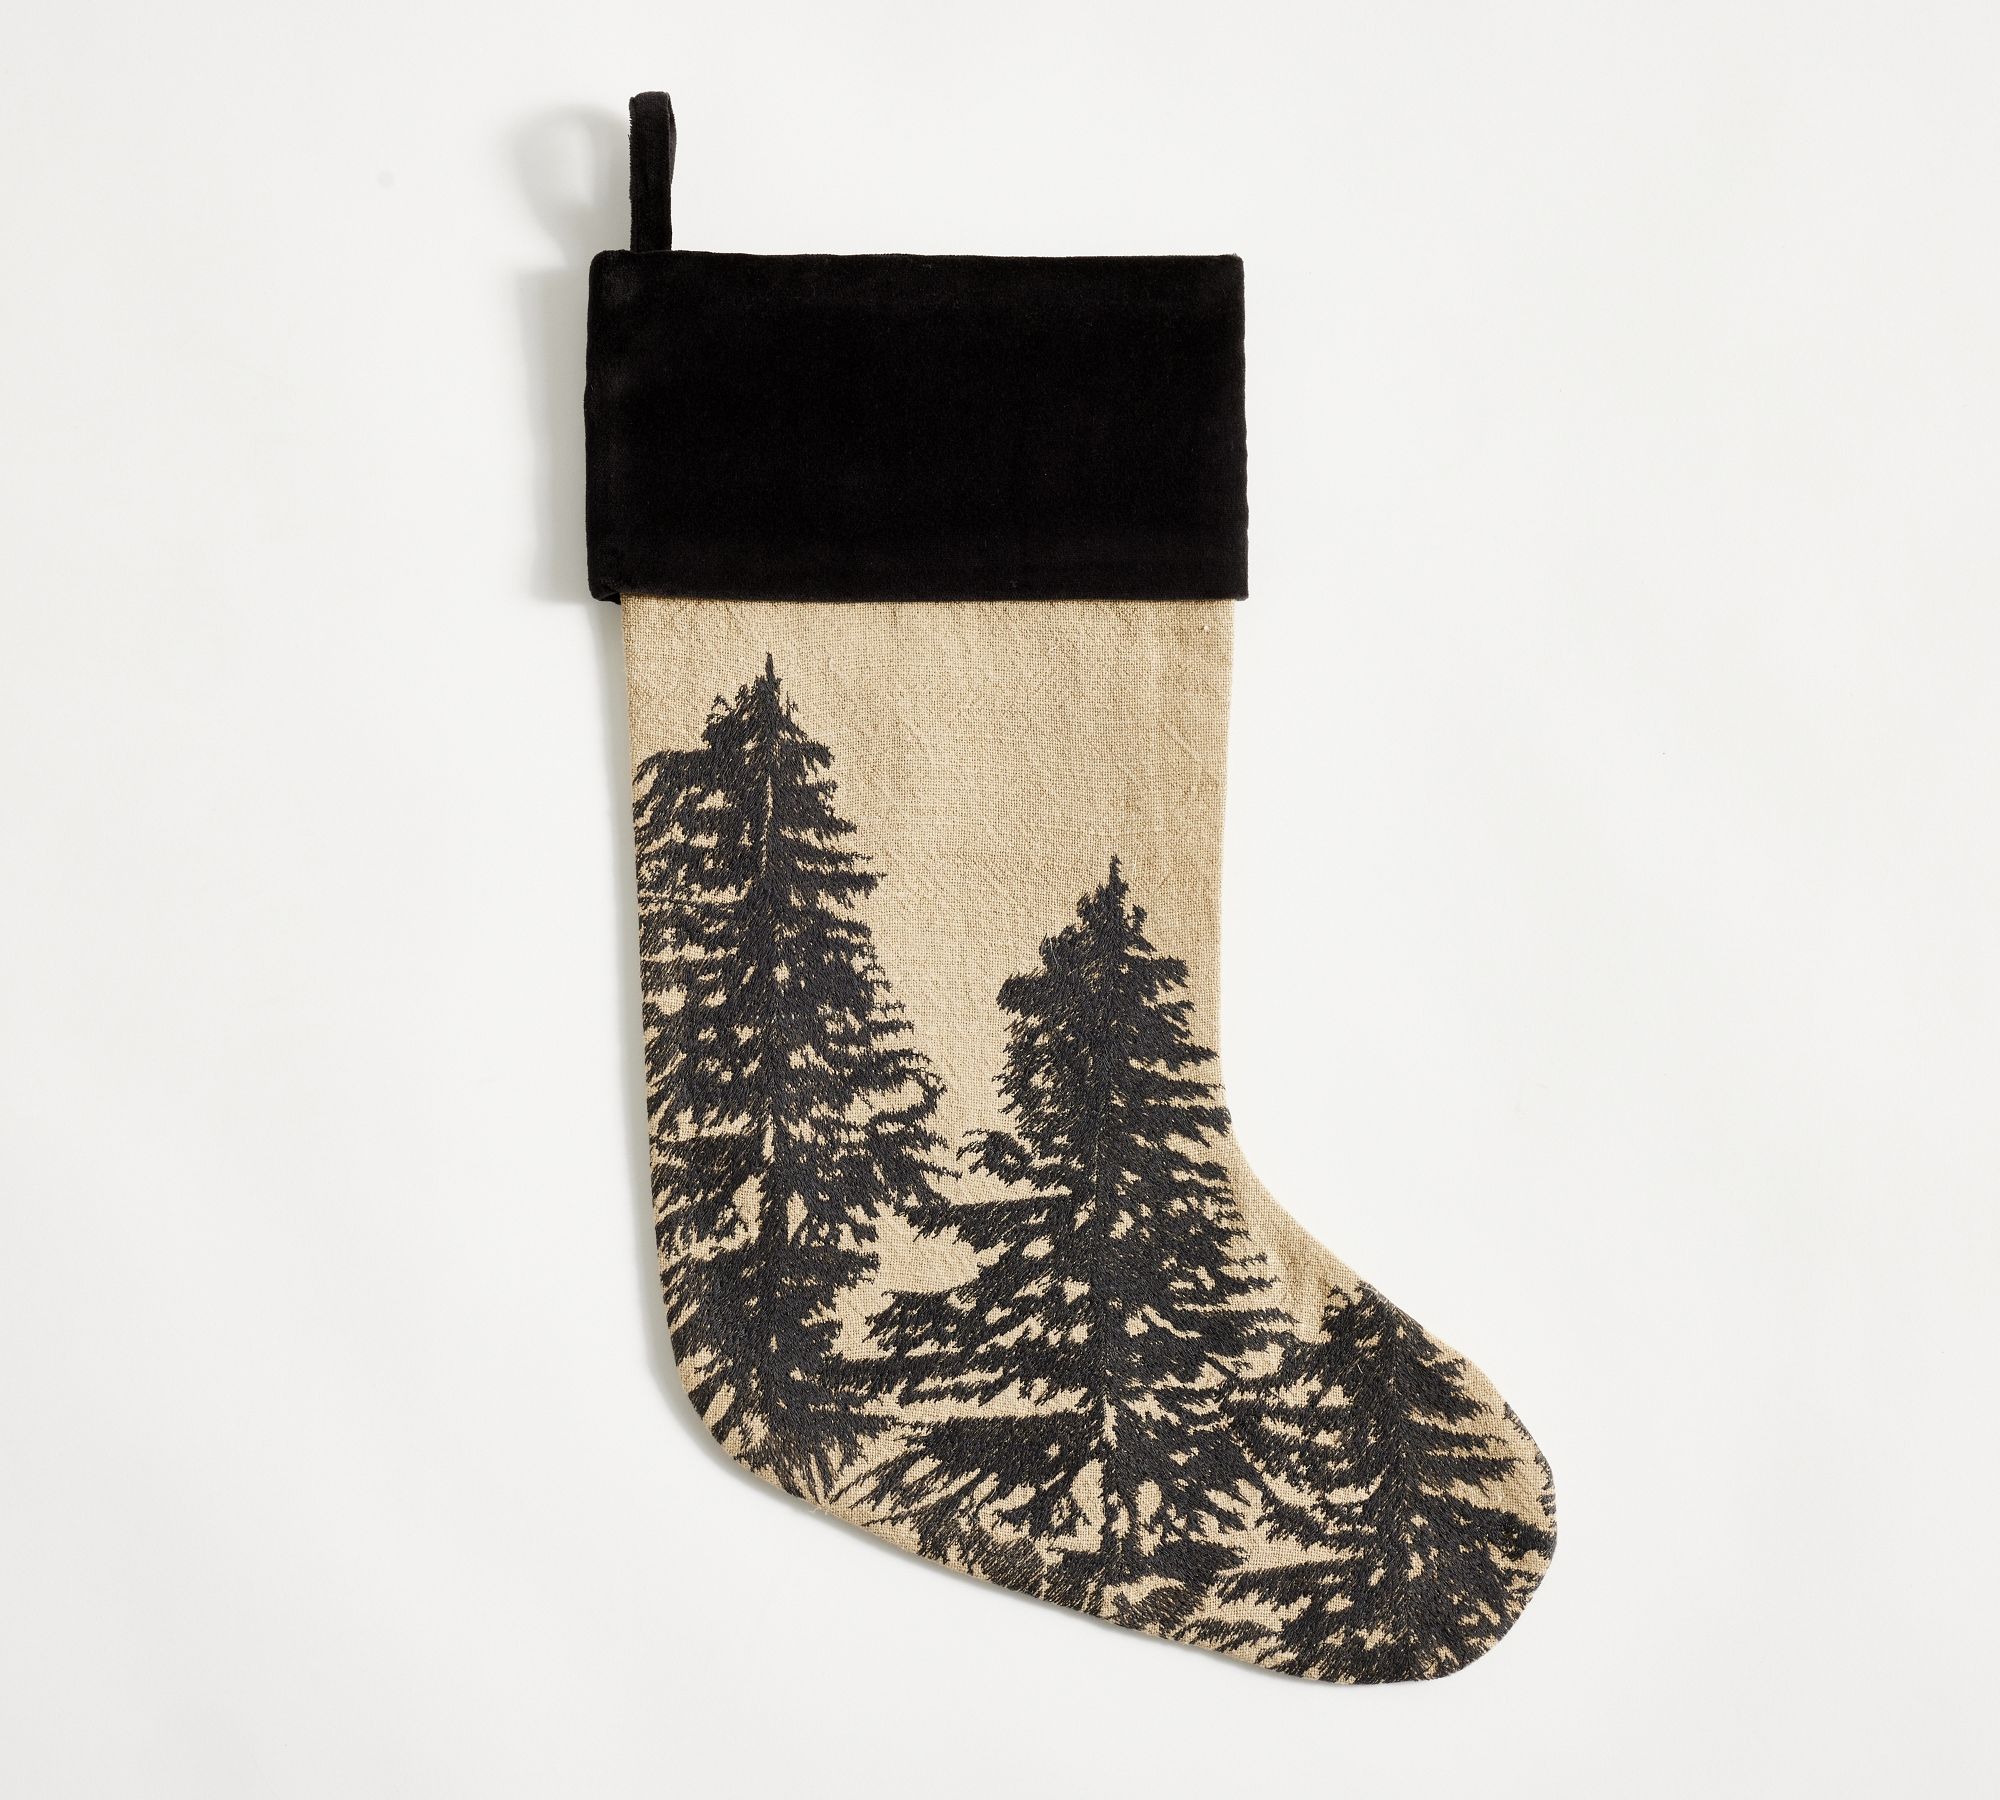 Rustic Forest Stockings